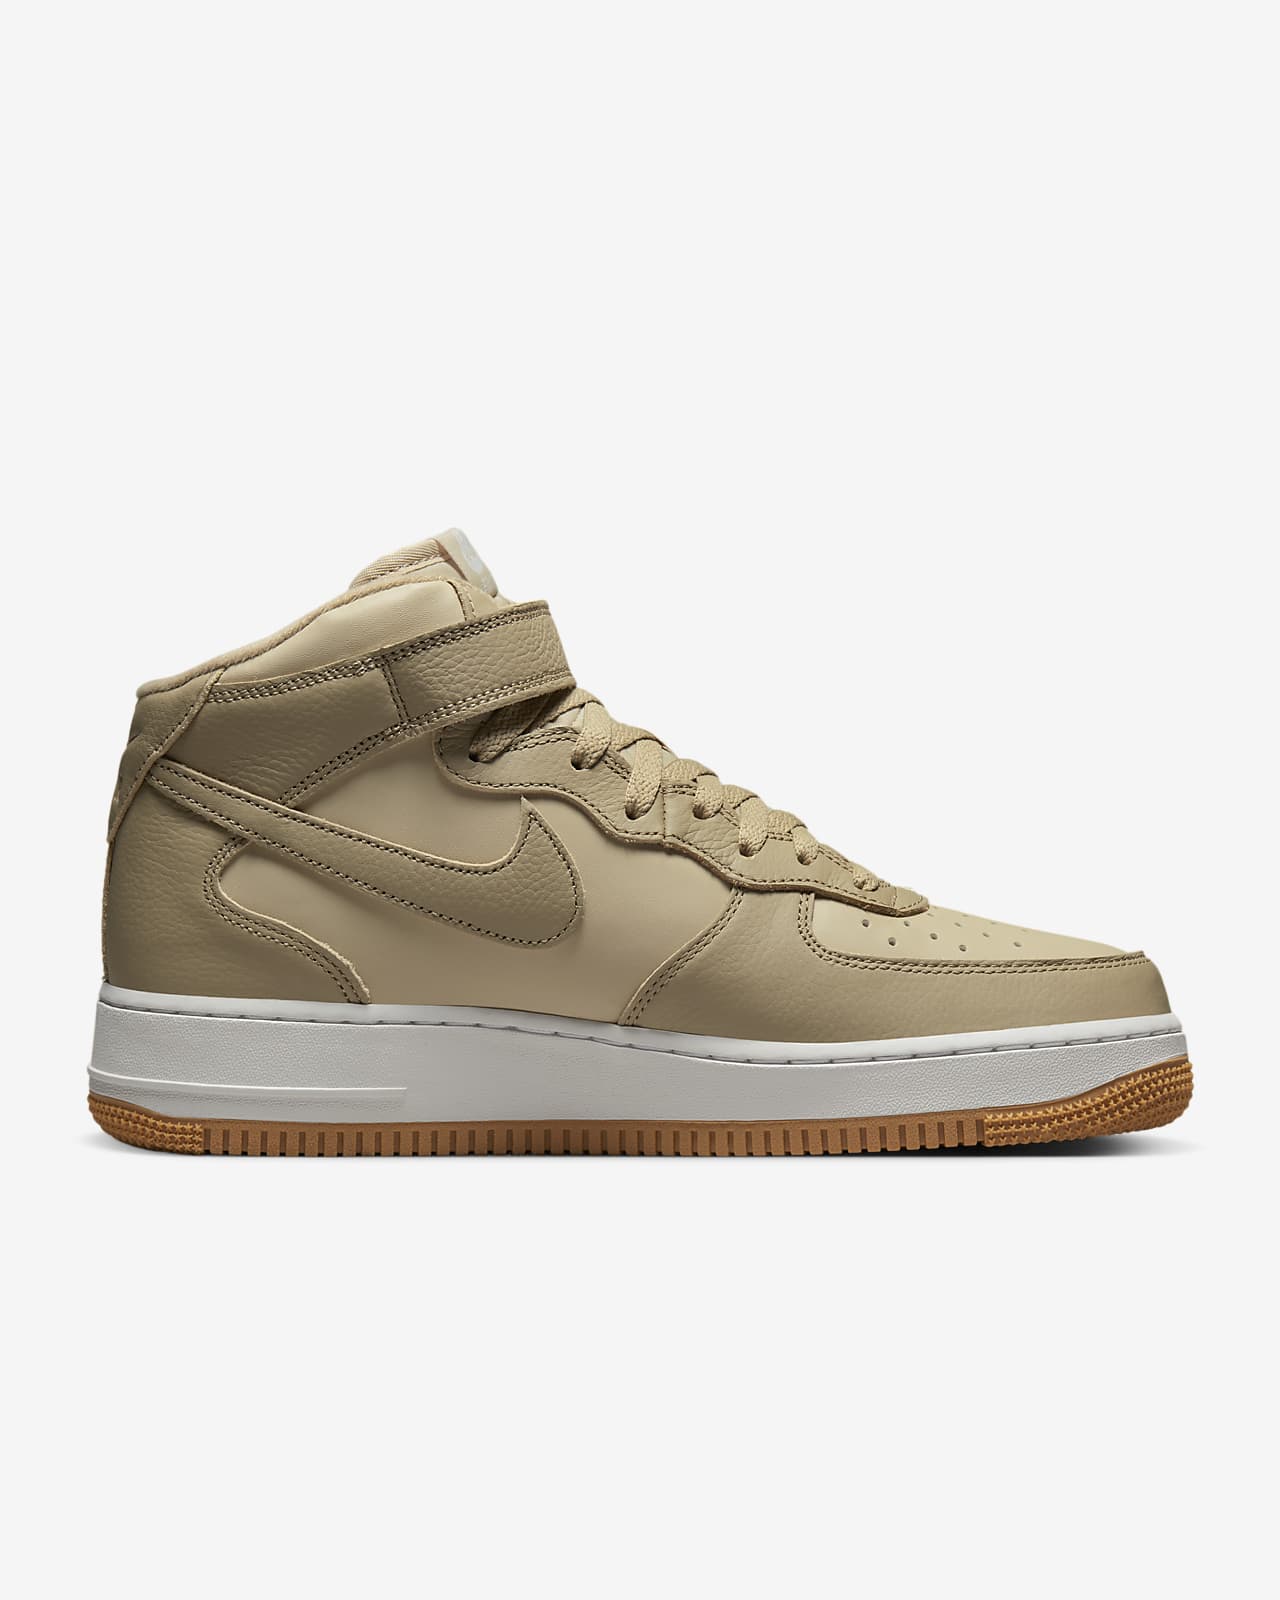 Nike Air Force 1 Mid '07 LX Men's Shoes. Nike CA